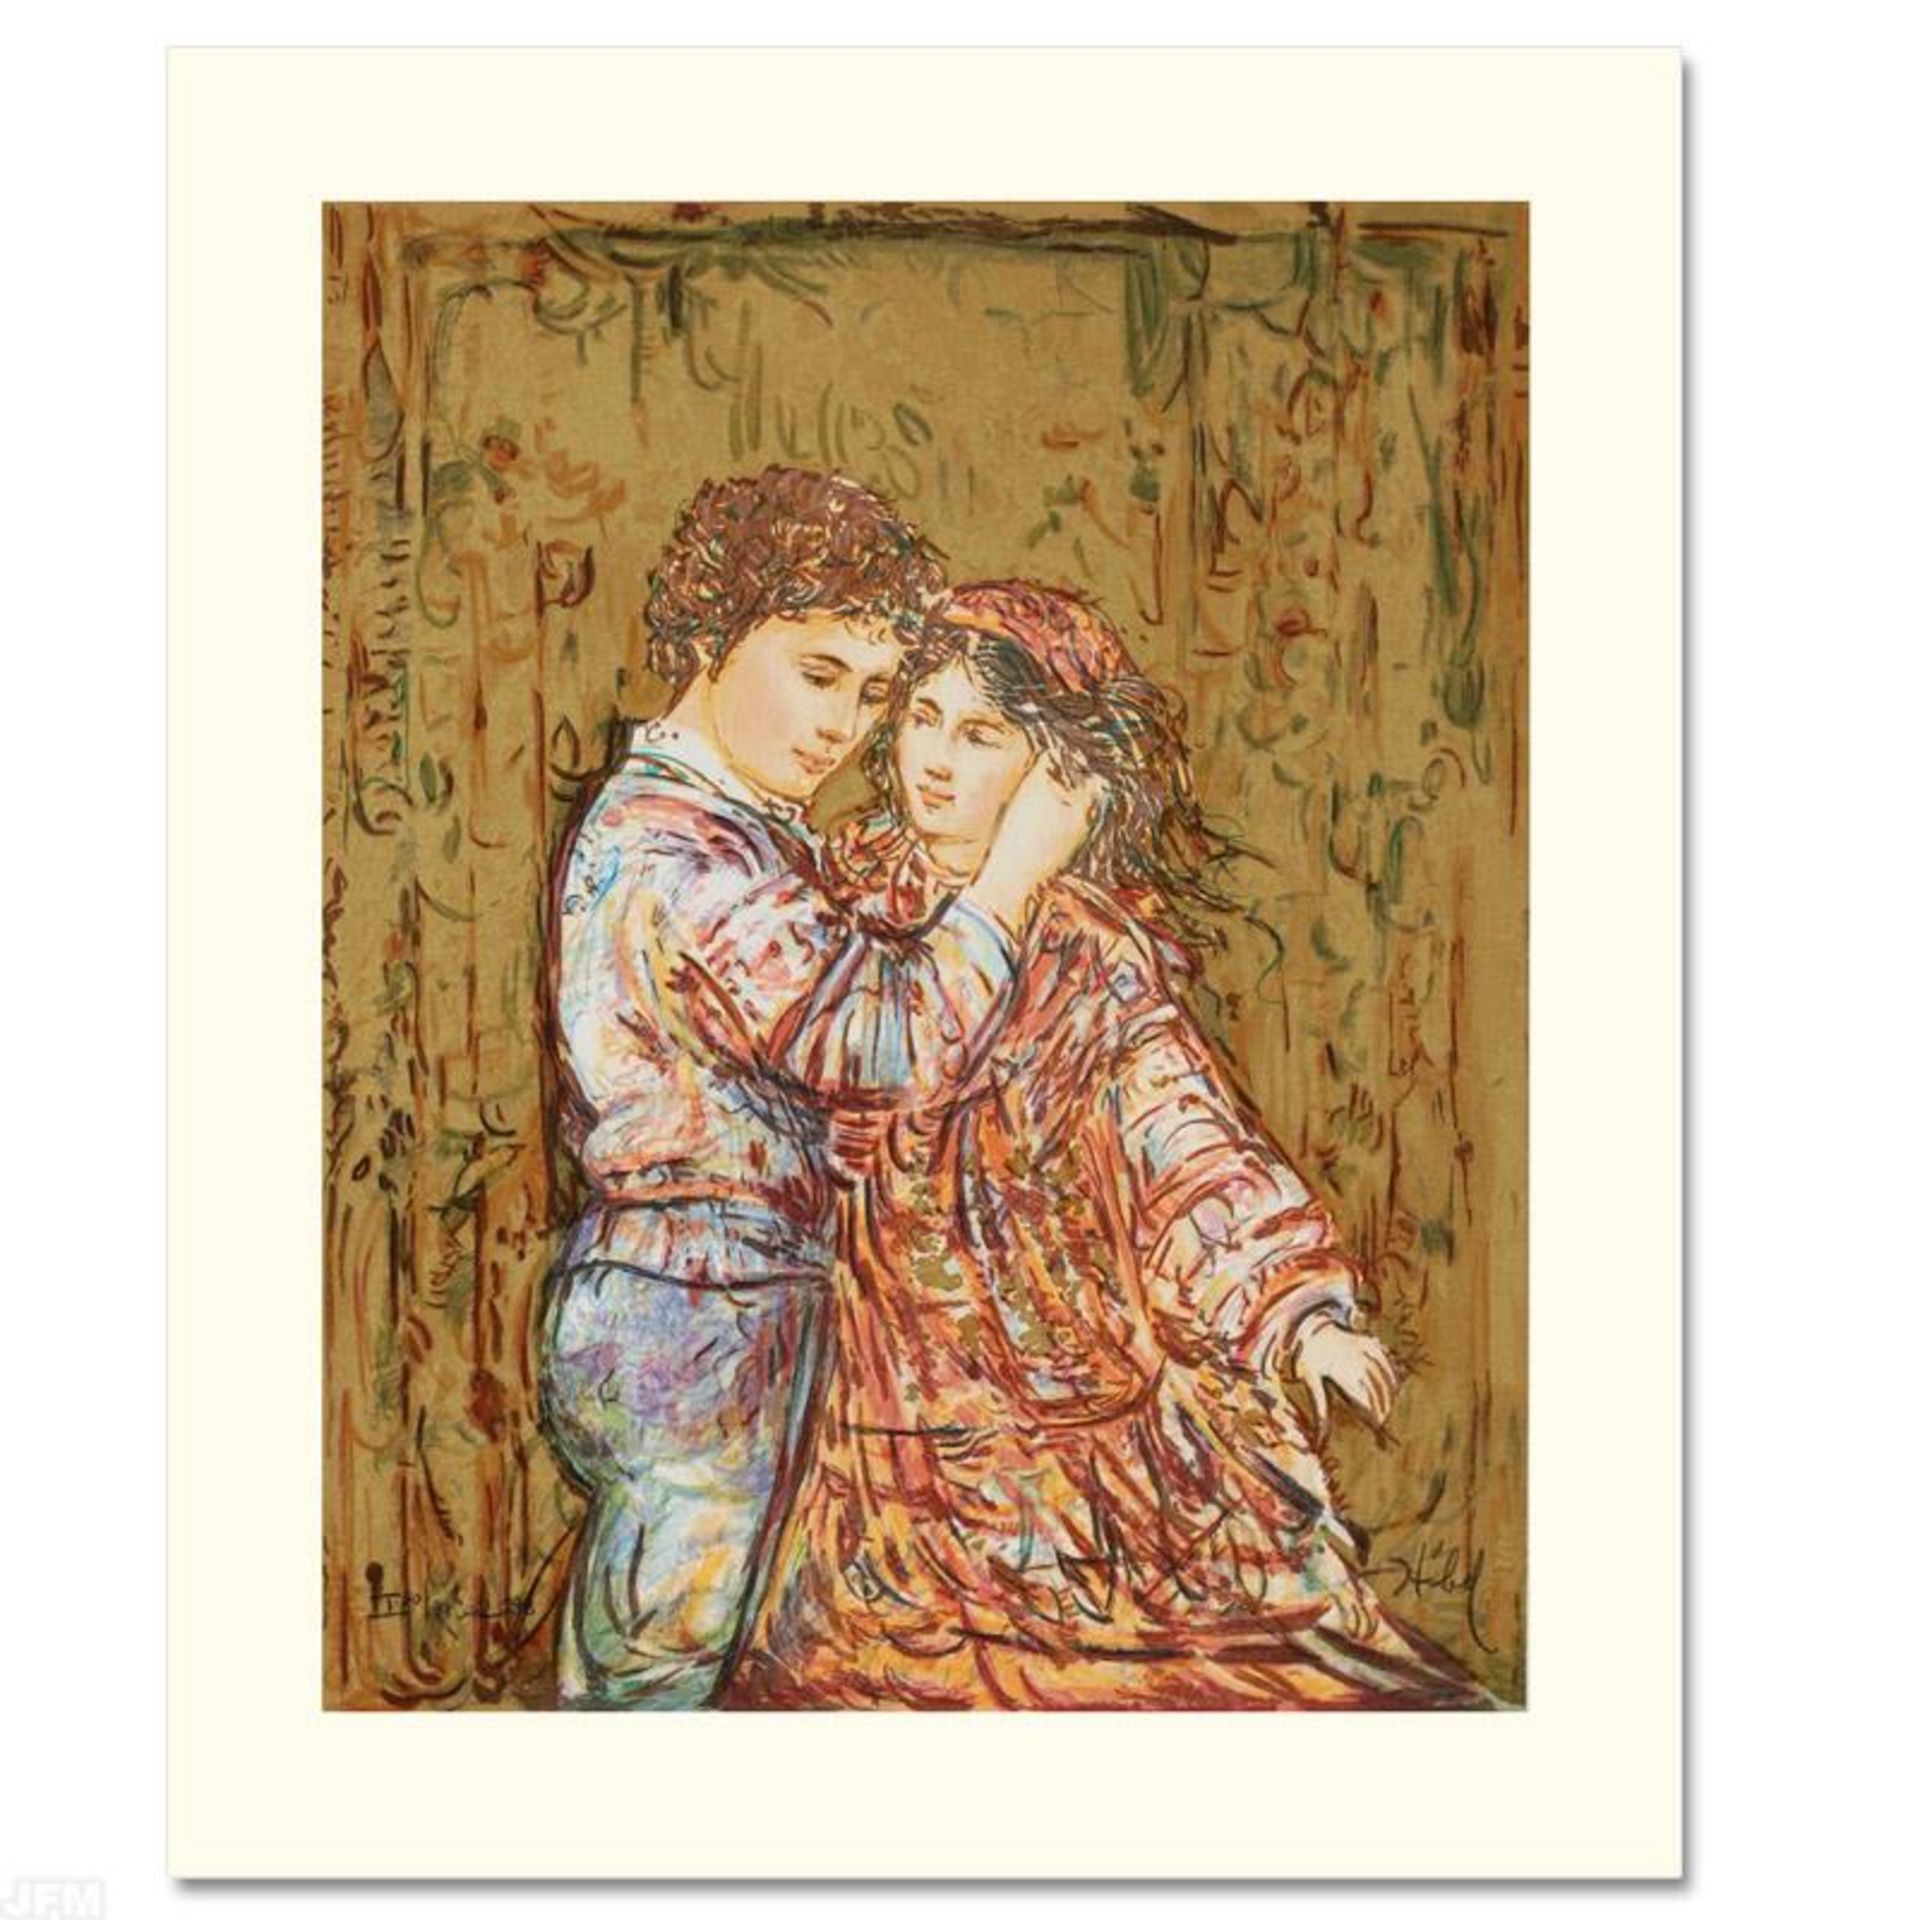 "Interlude" Limited Edition Serigraph by Edna Hibel (1917-2014), Numbered and Ha